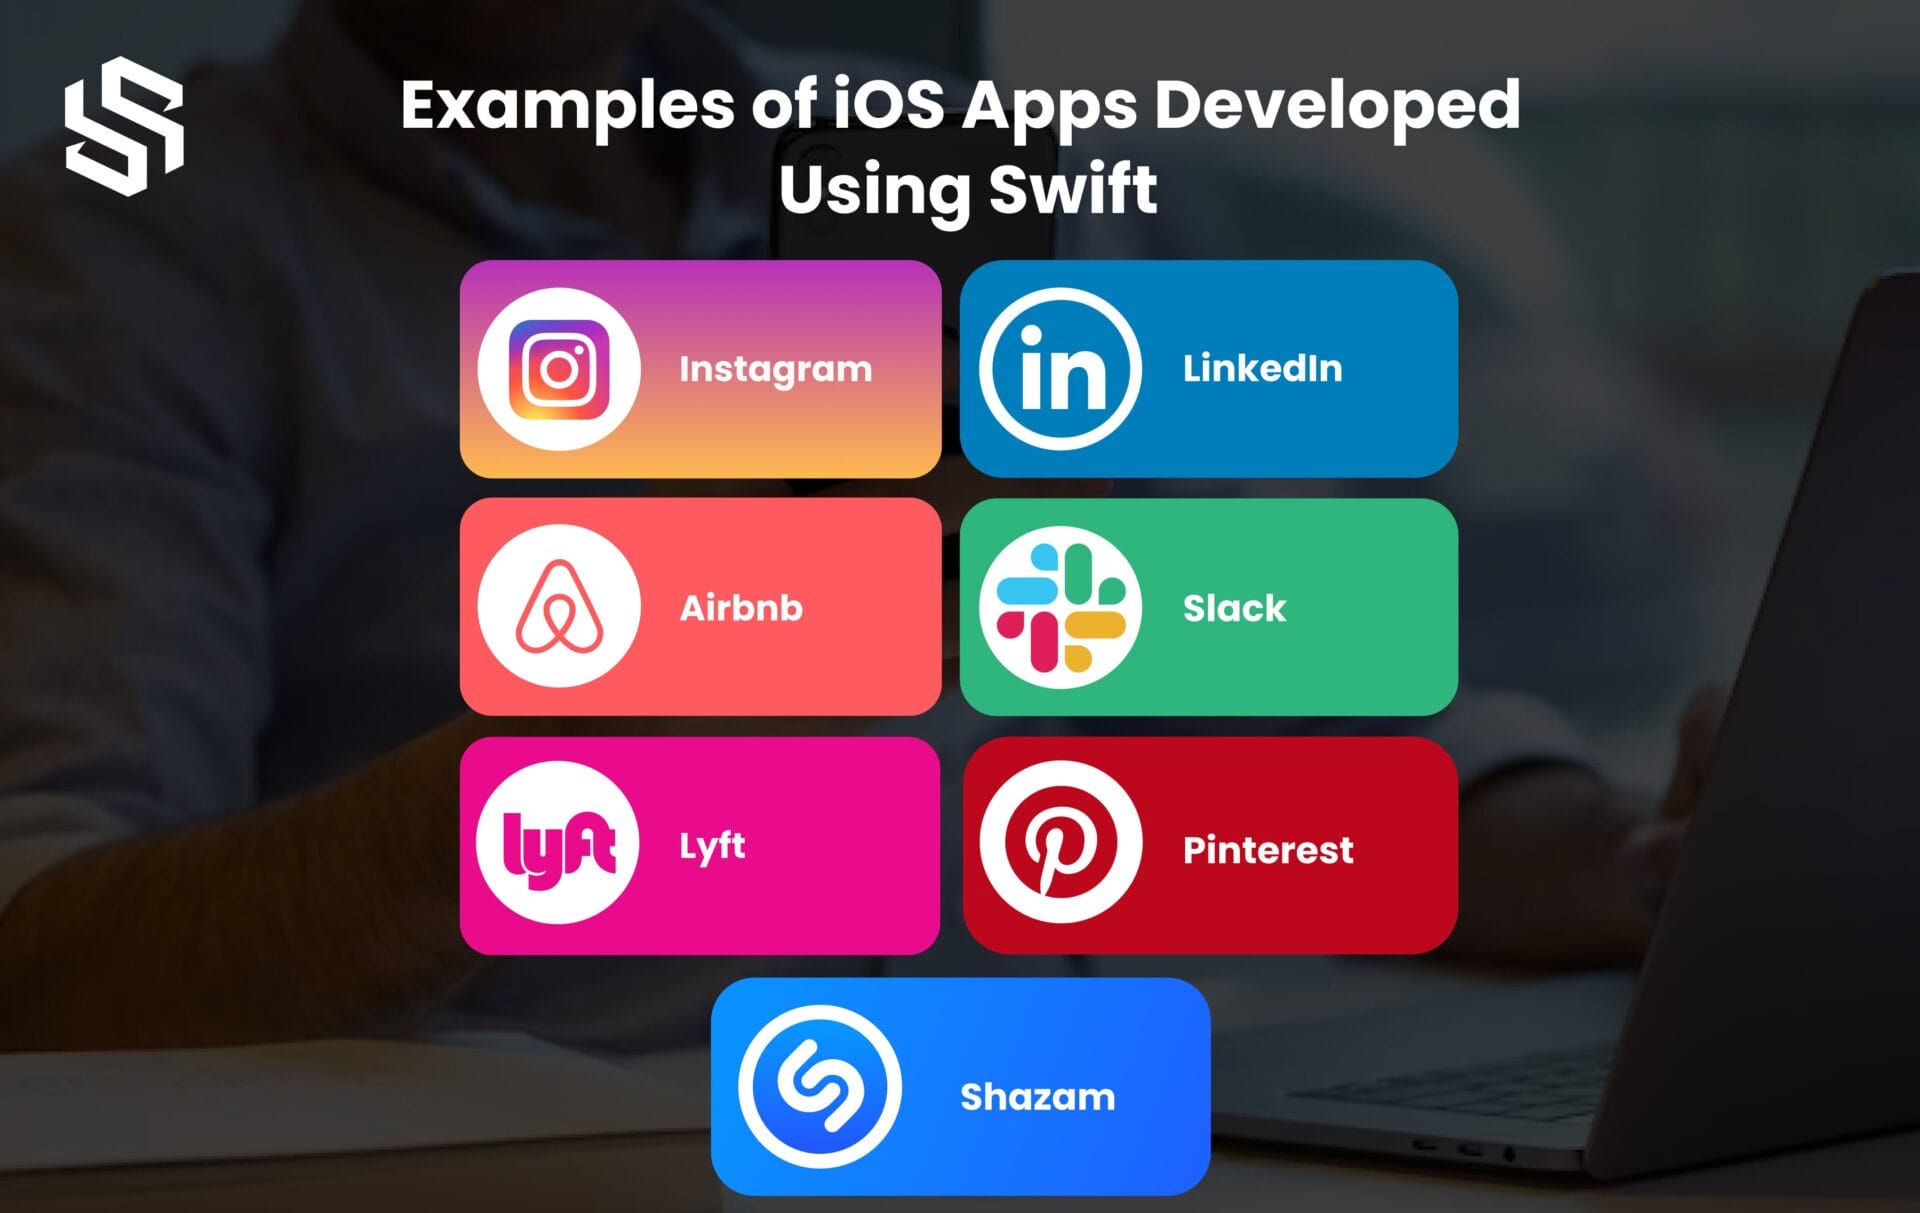 Examples of iOS Apps Developed Using Swift